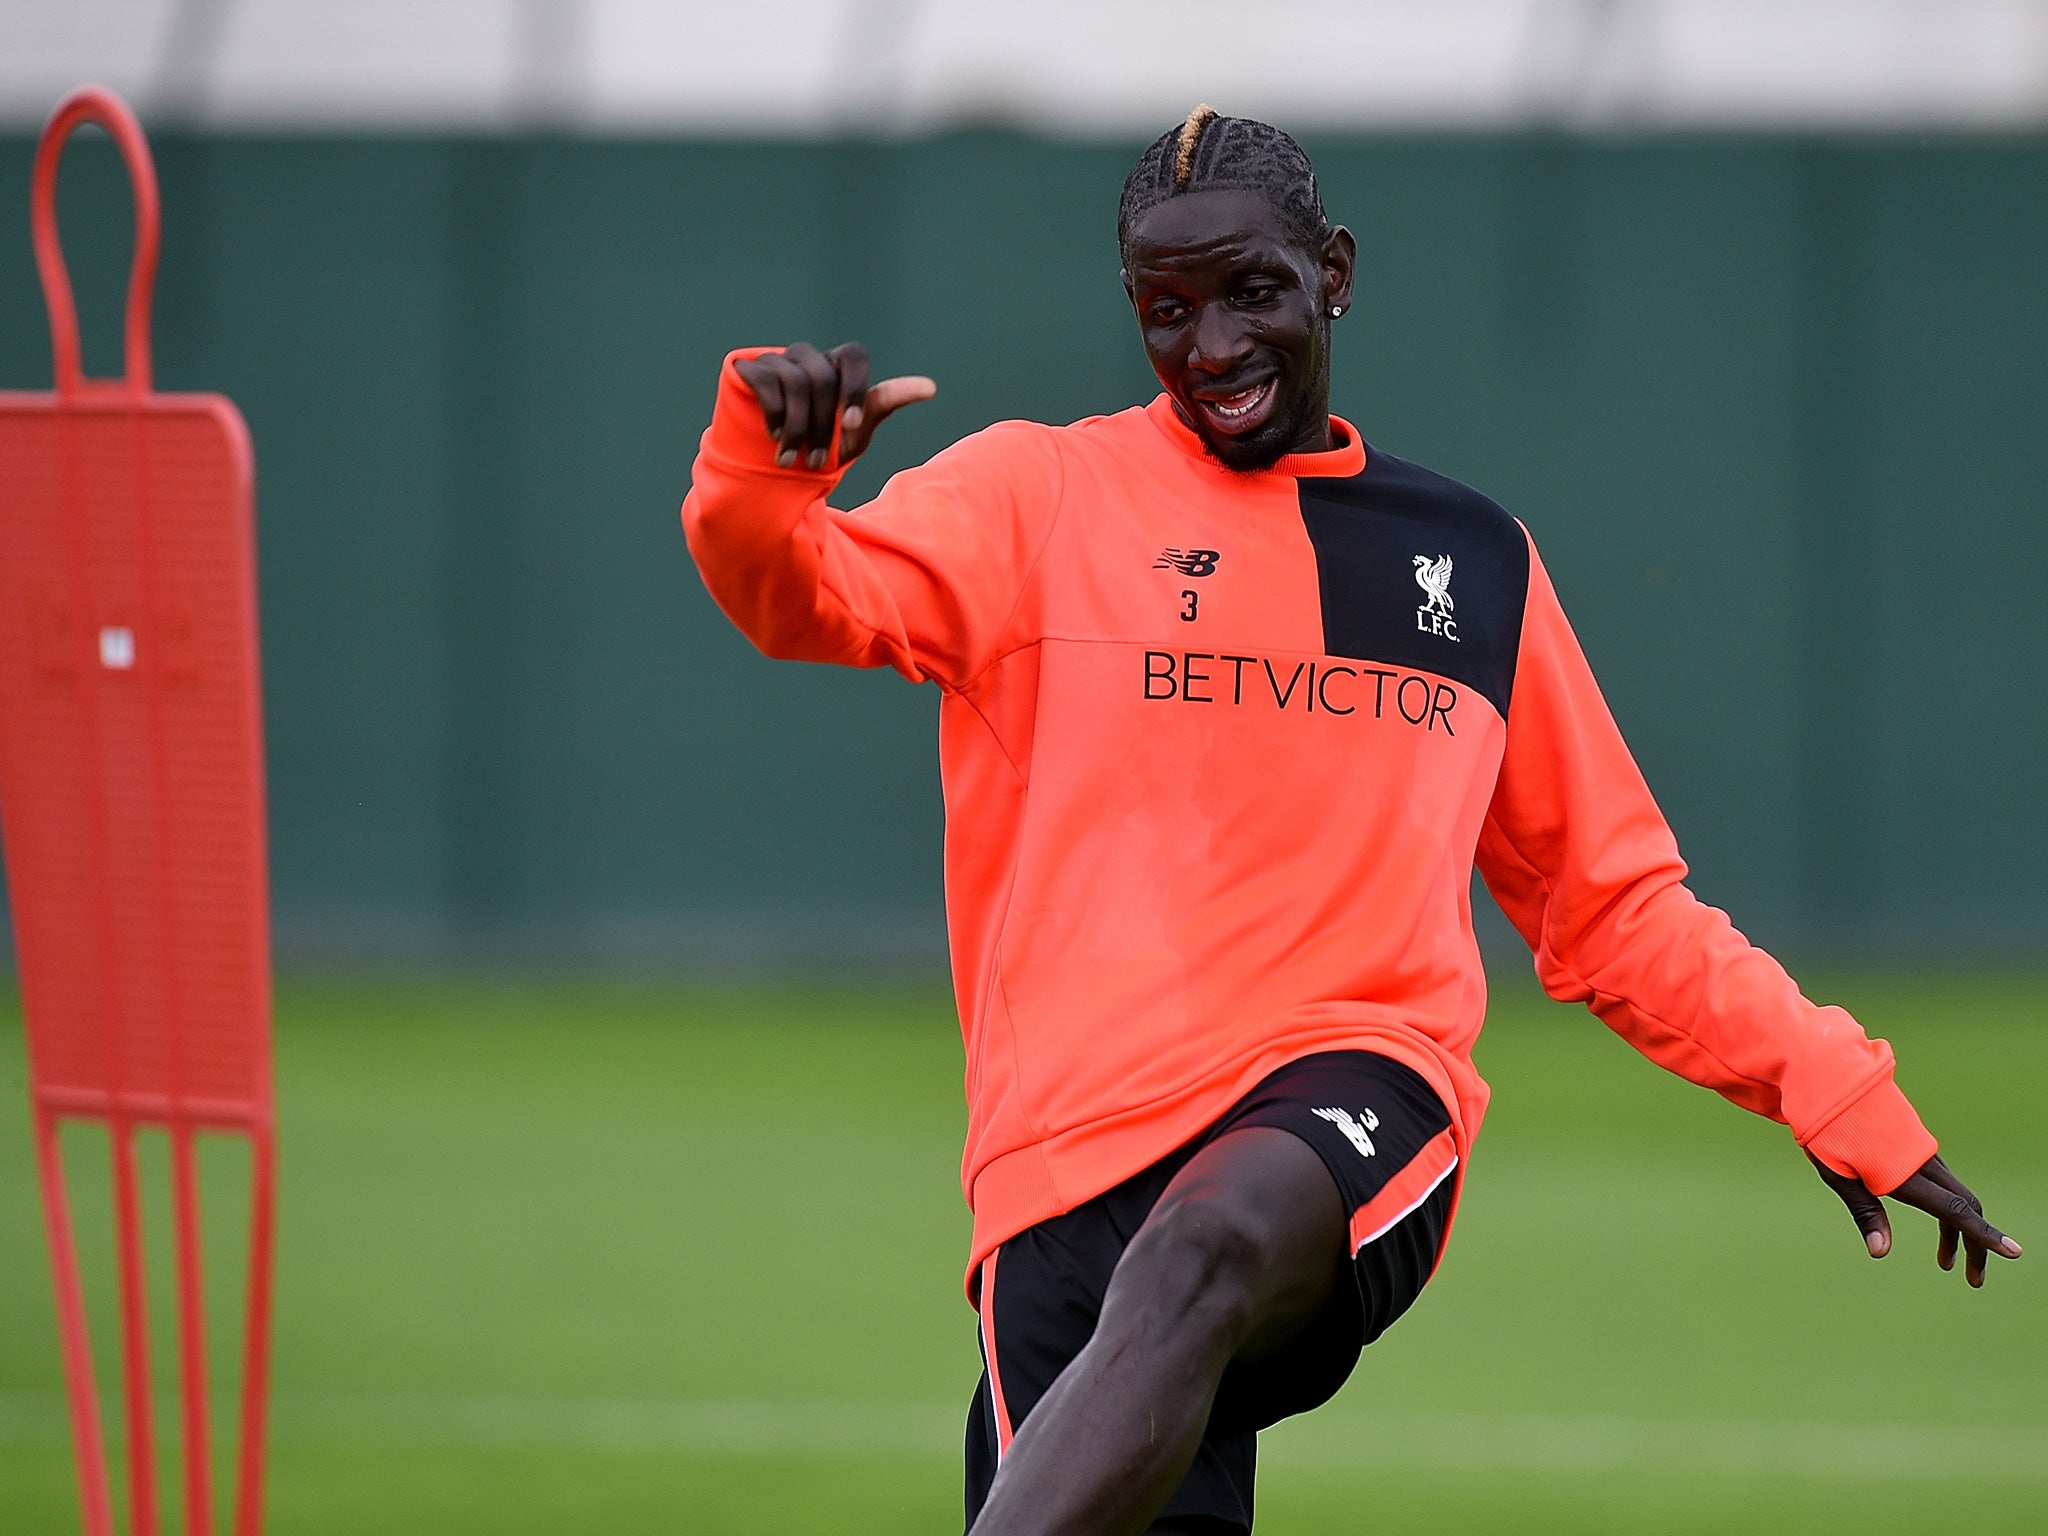 Sakho faces a daunting future ahead of him at Anfield